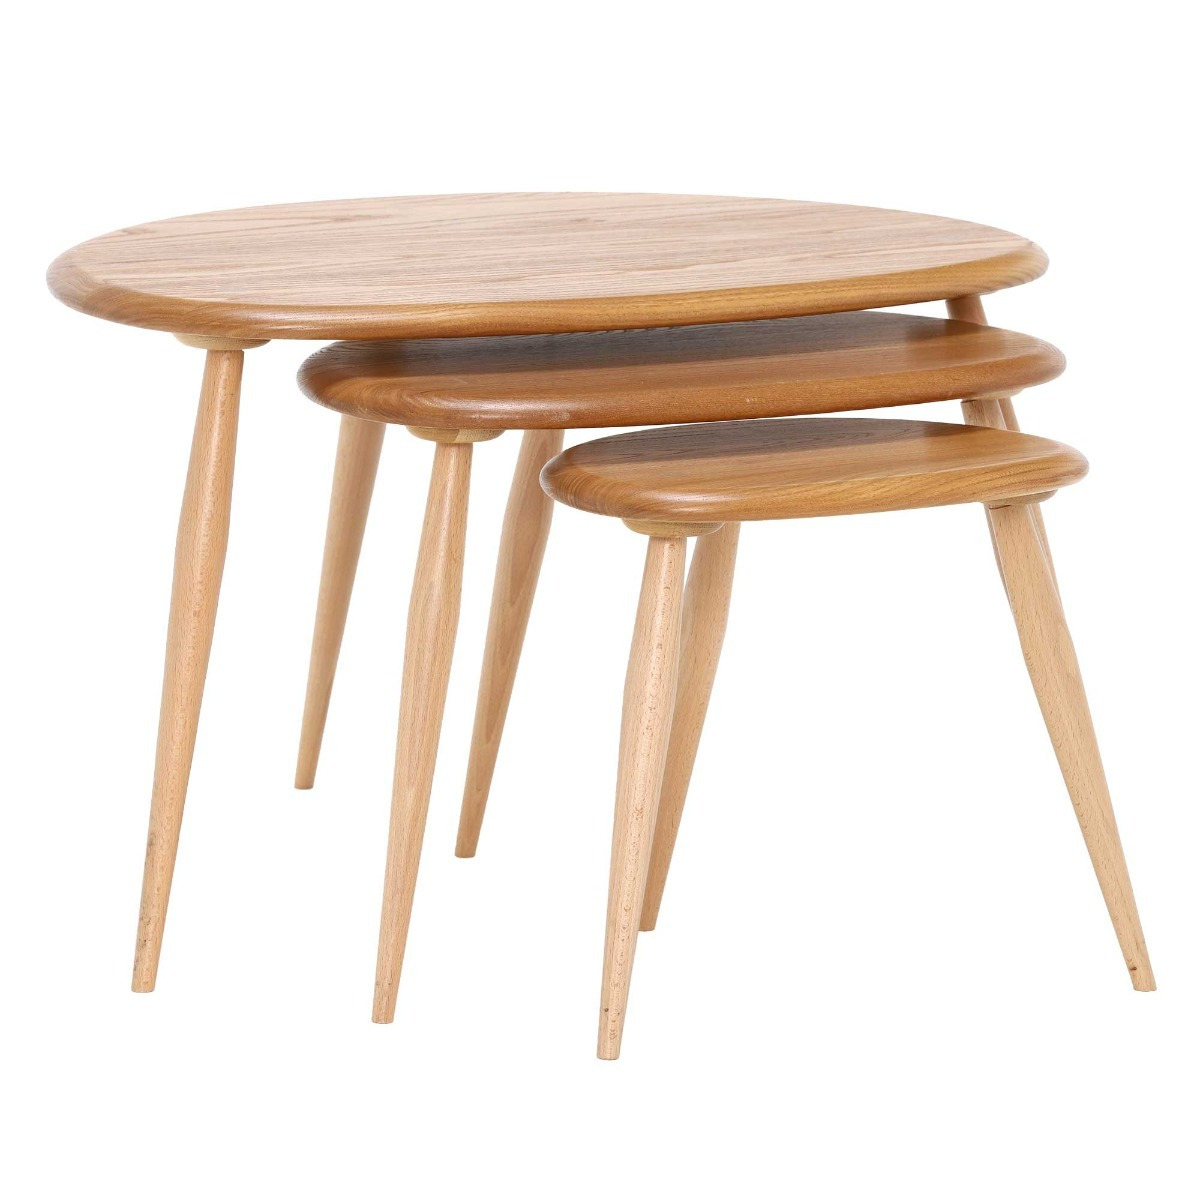 Ercol Pebble Nest Of Tables, Round, Ash Wood - Barker & Stonehouse - image 1